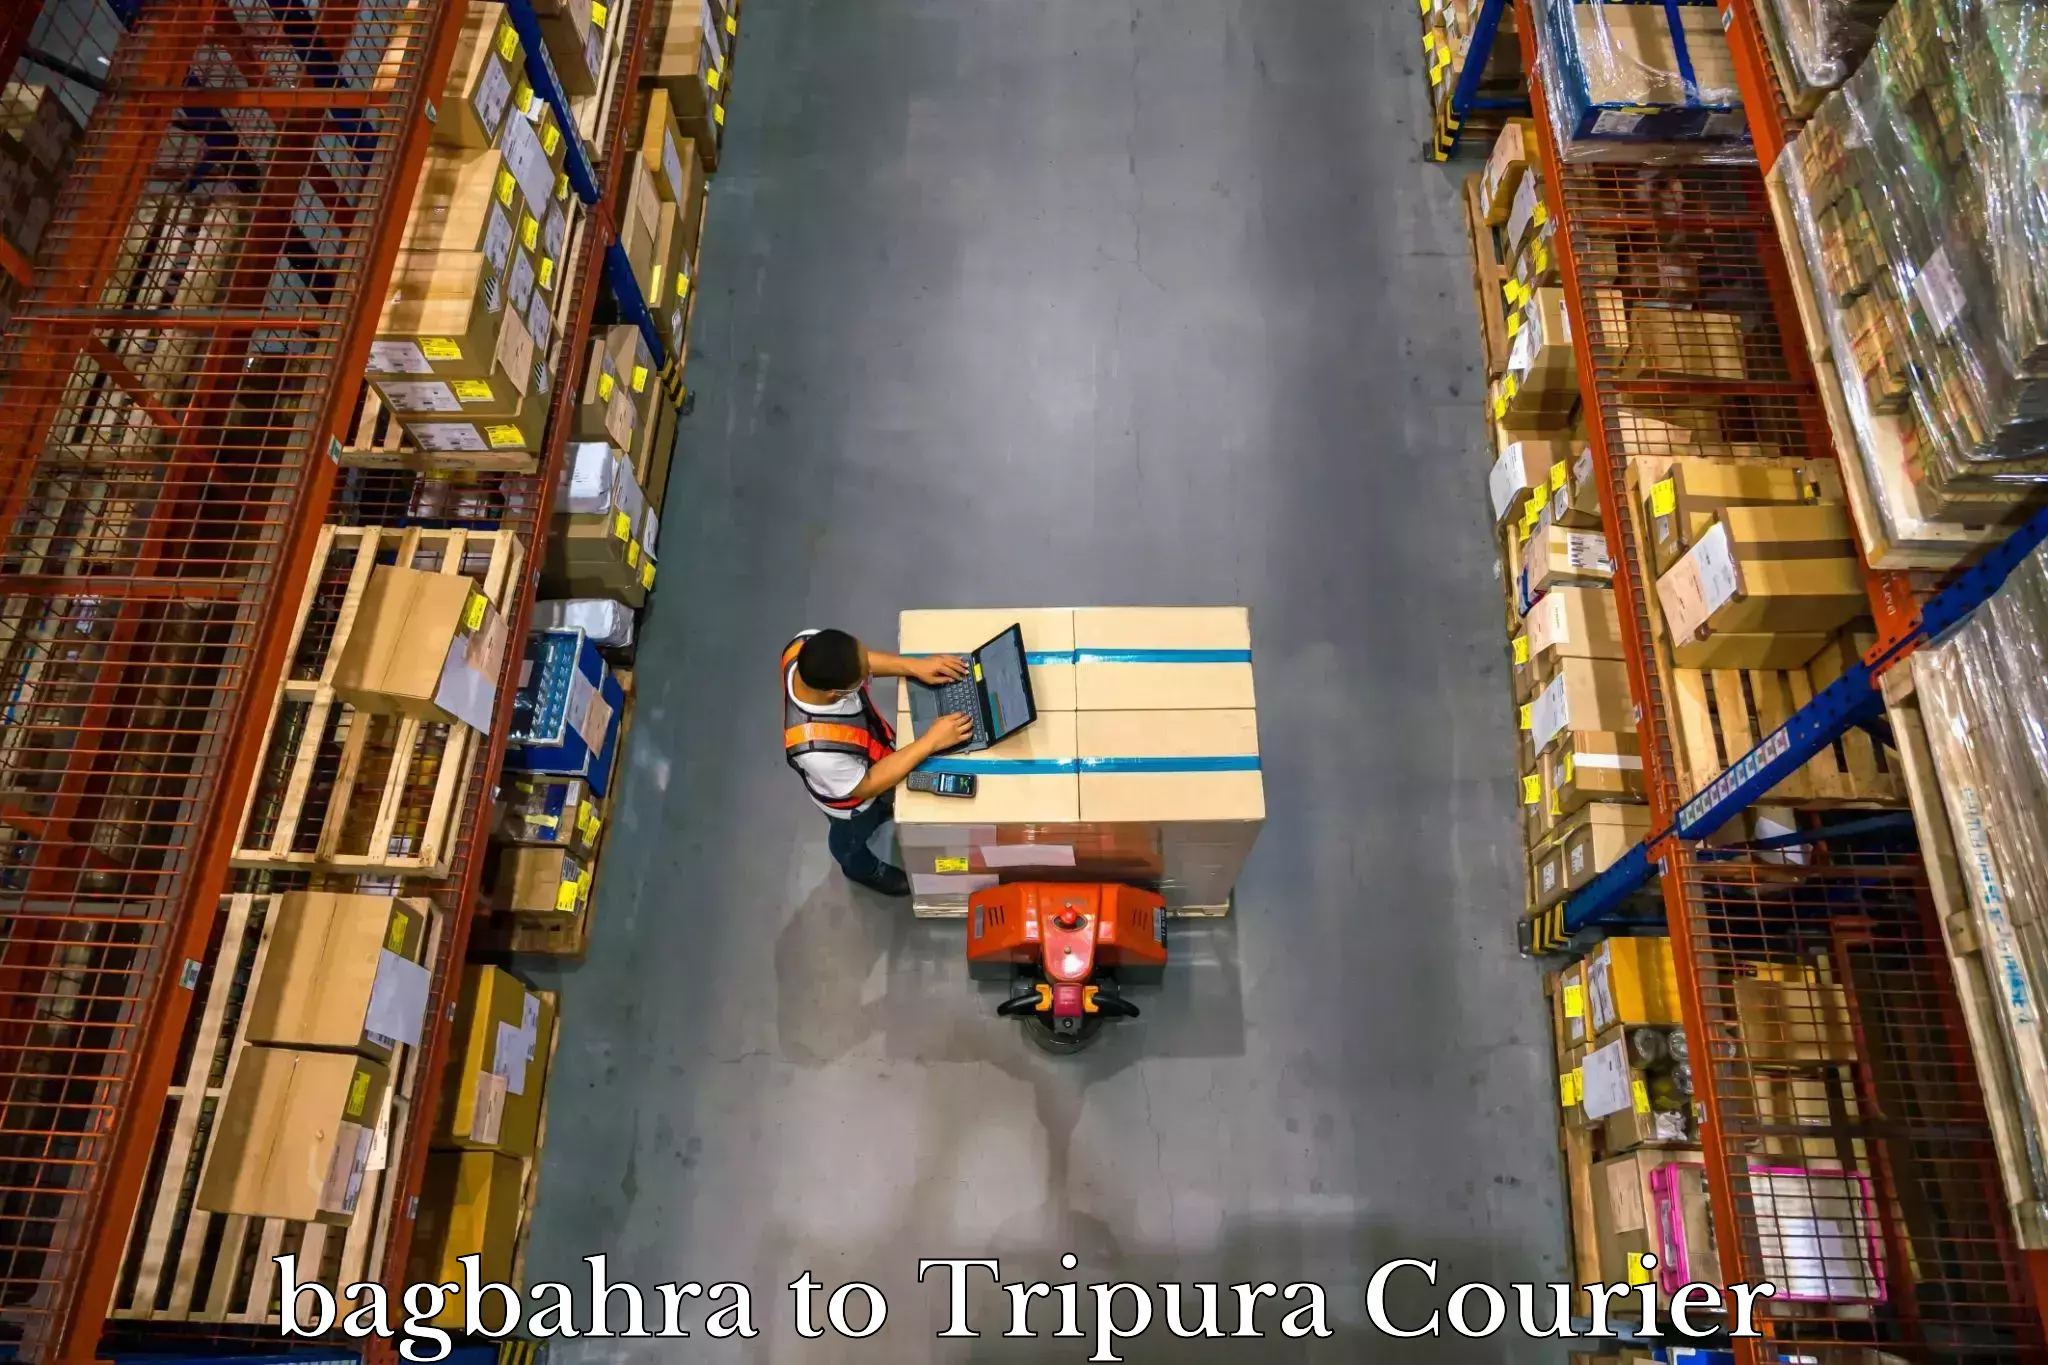 Luggage transport consulting in bagbahra to West Tripura